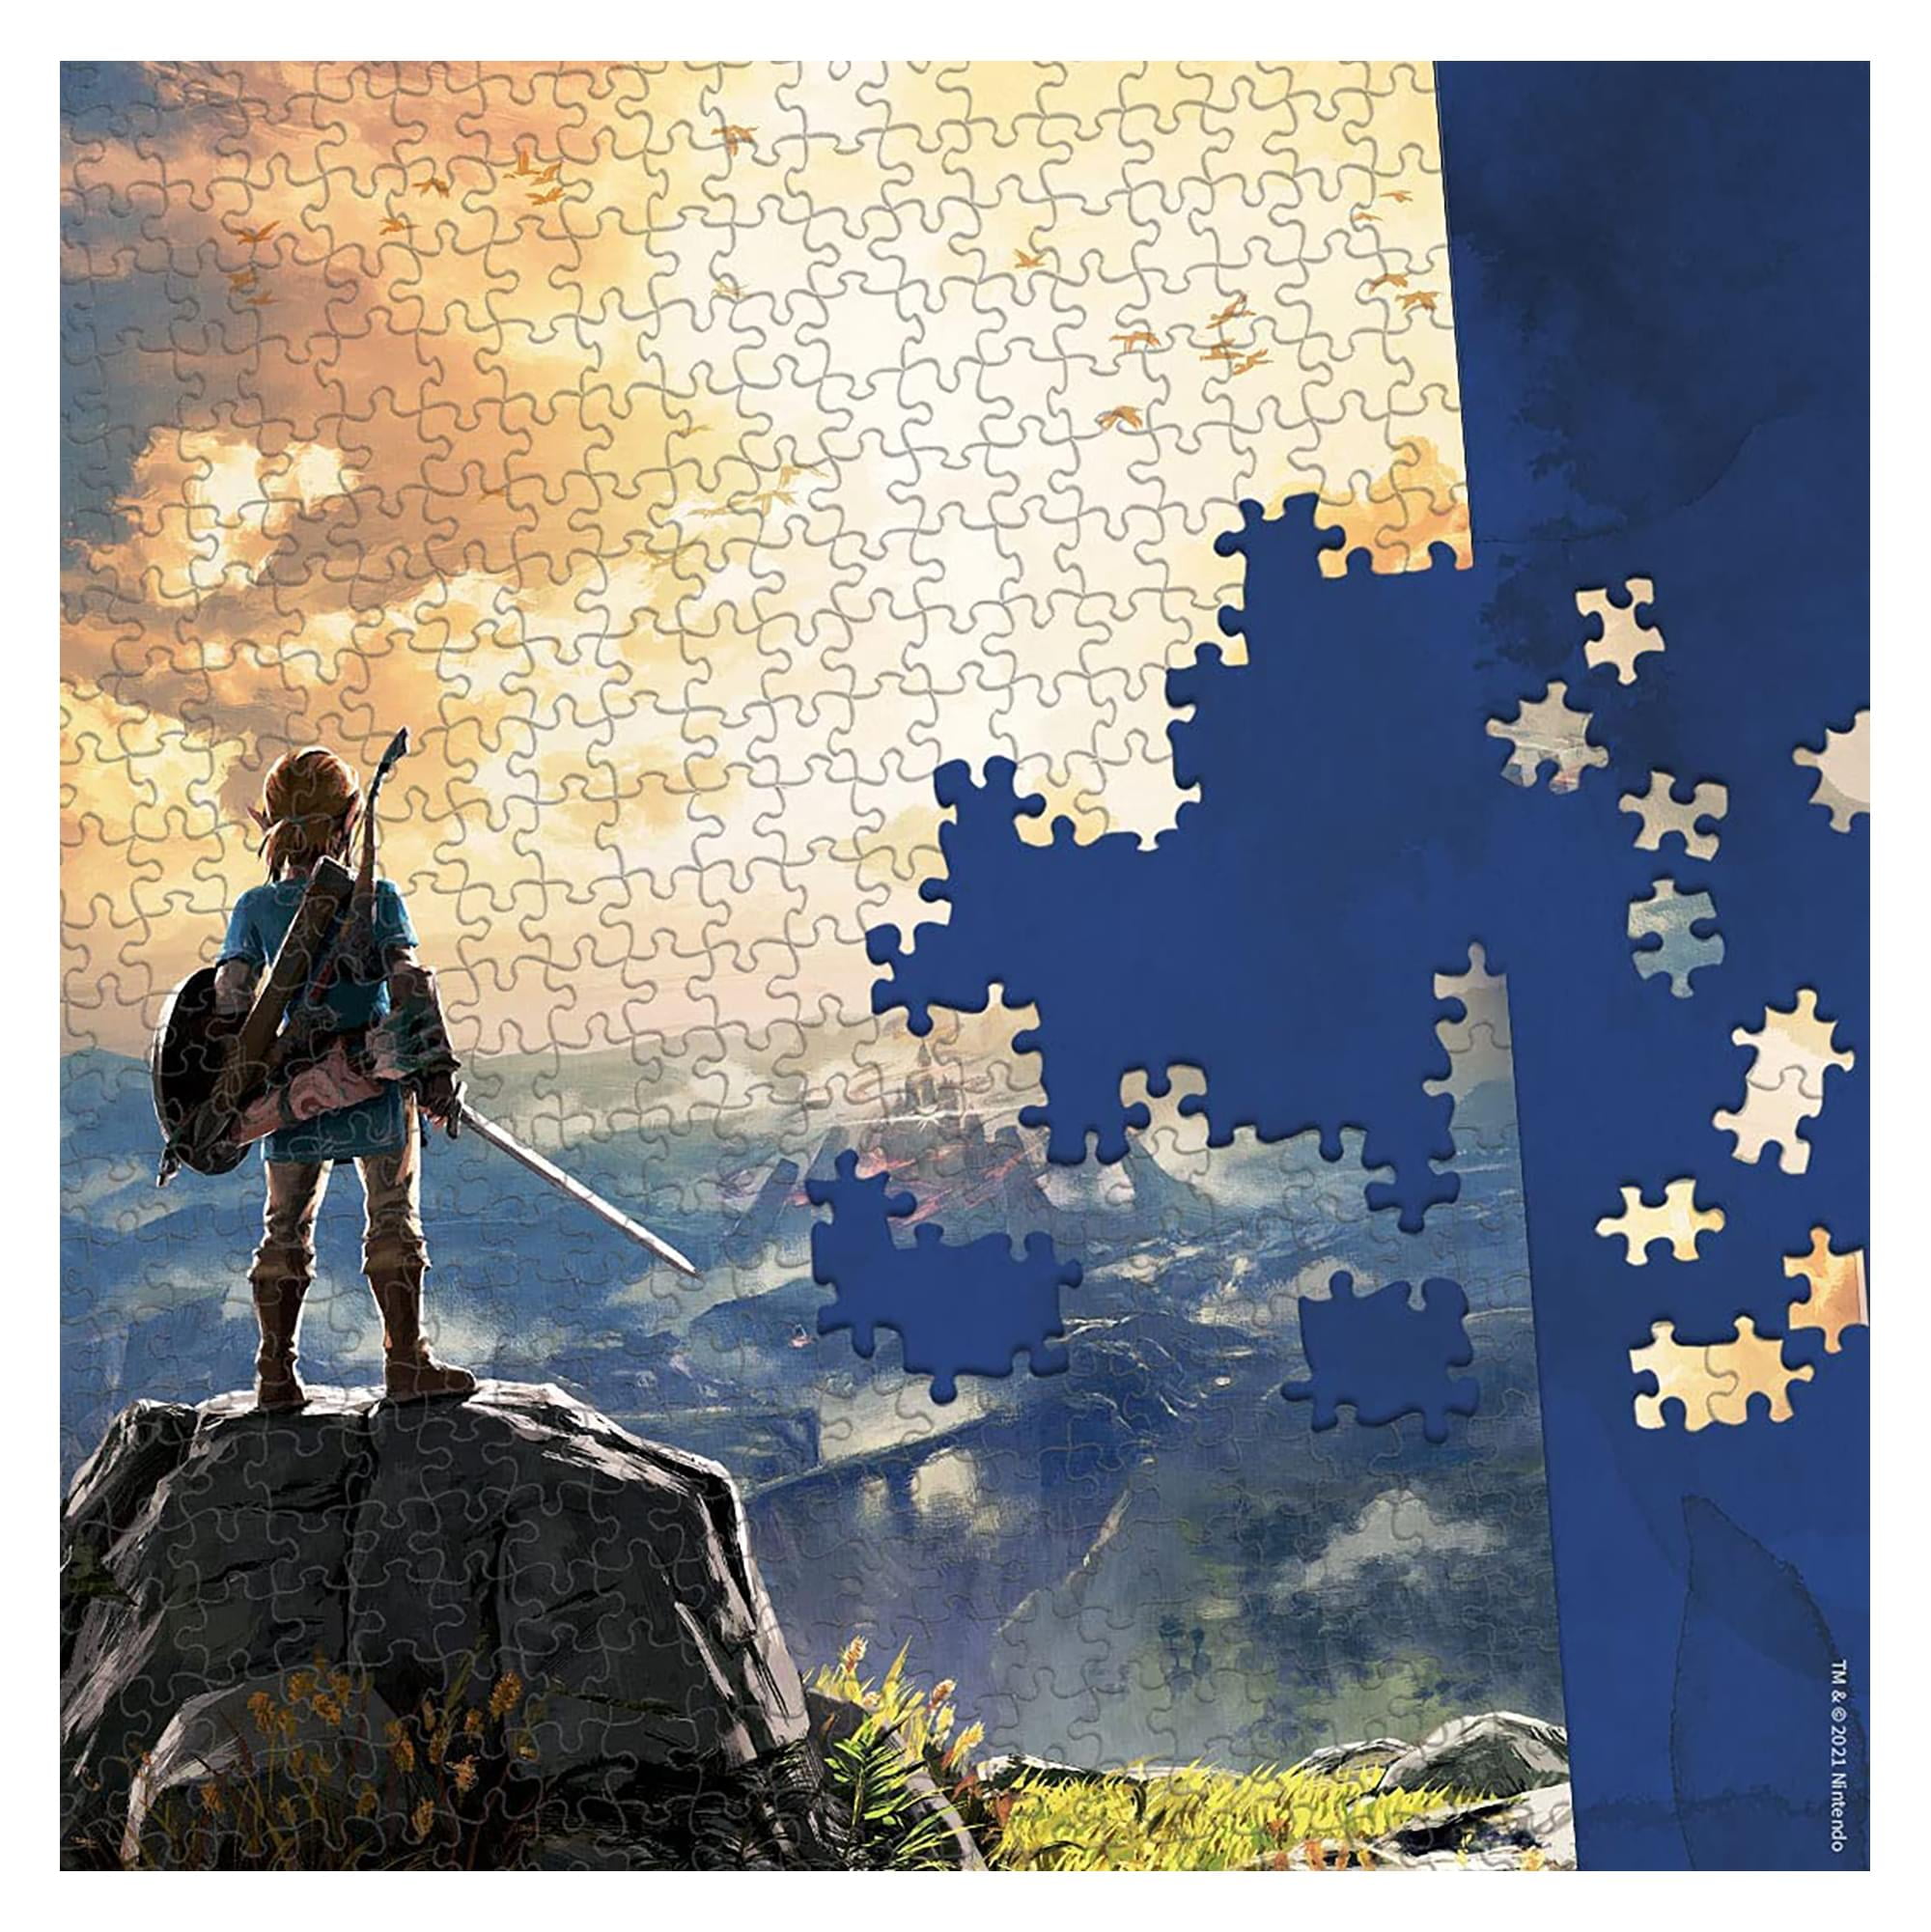 Jigsaw Puzzle Zelda, Video Game Puzzle, Christmas Toys